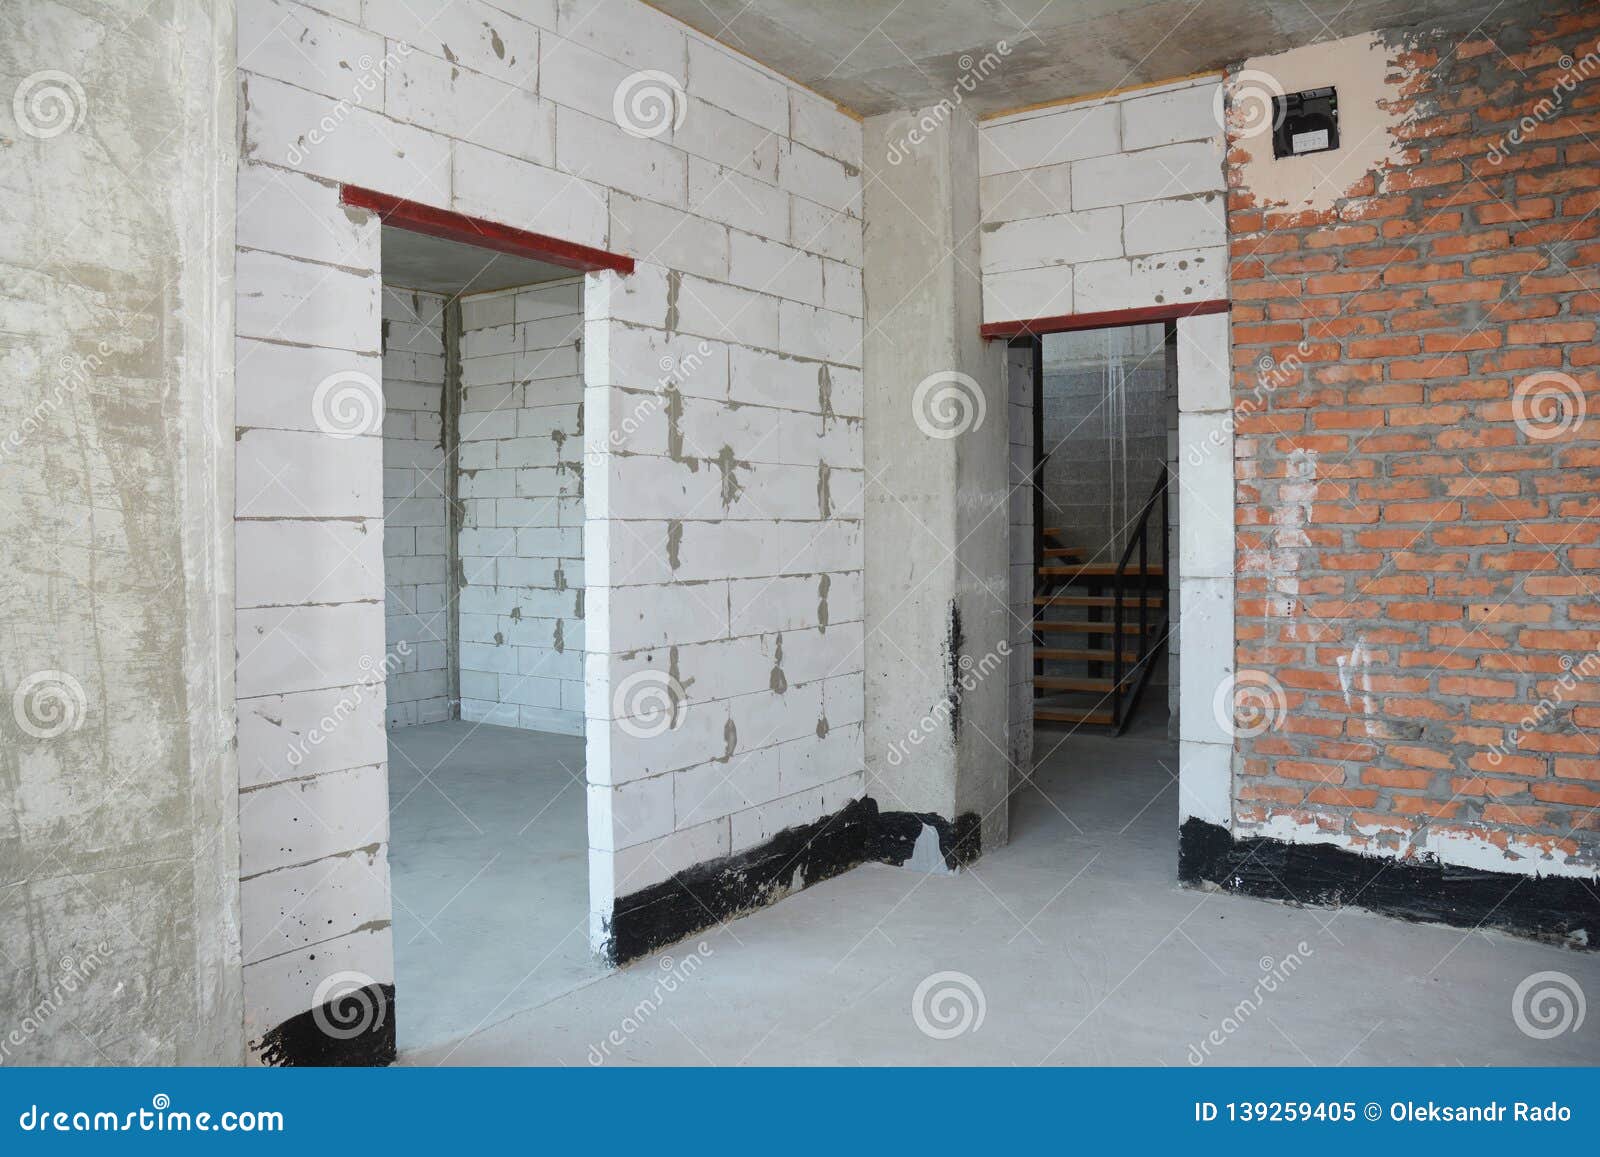 Empty Room Interior Build With White And Red Bricks